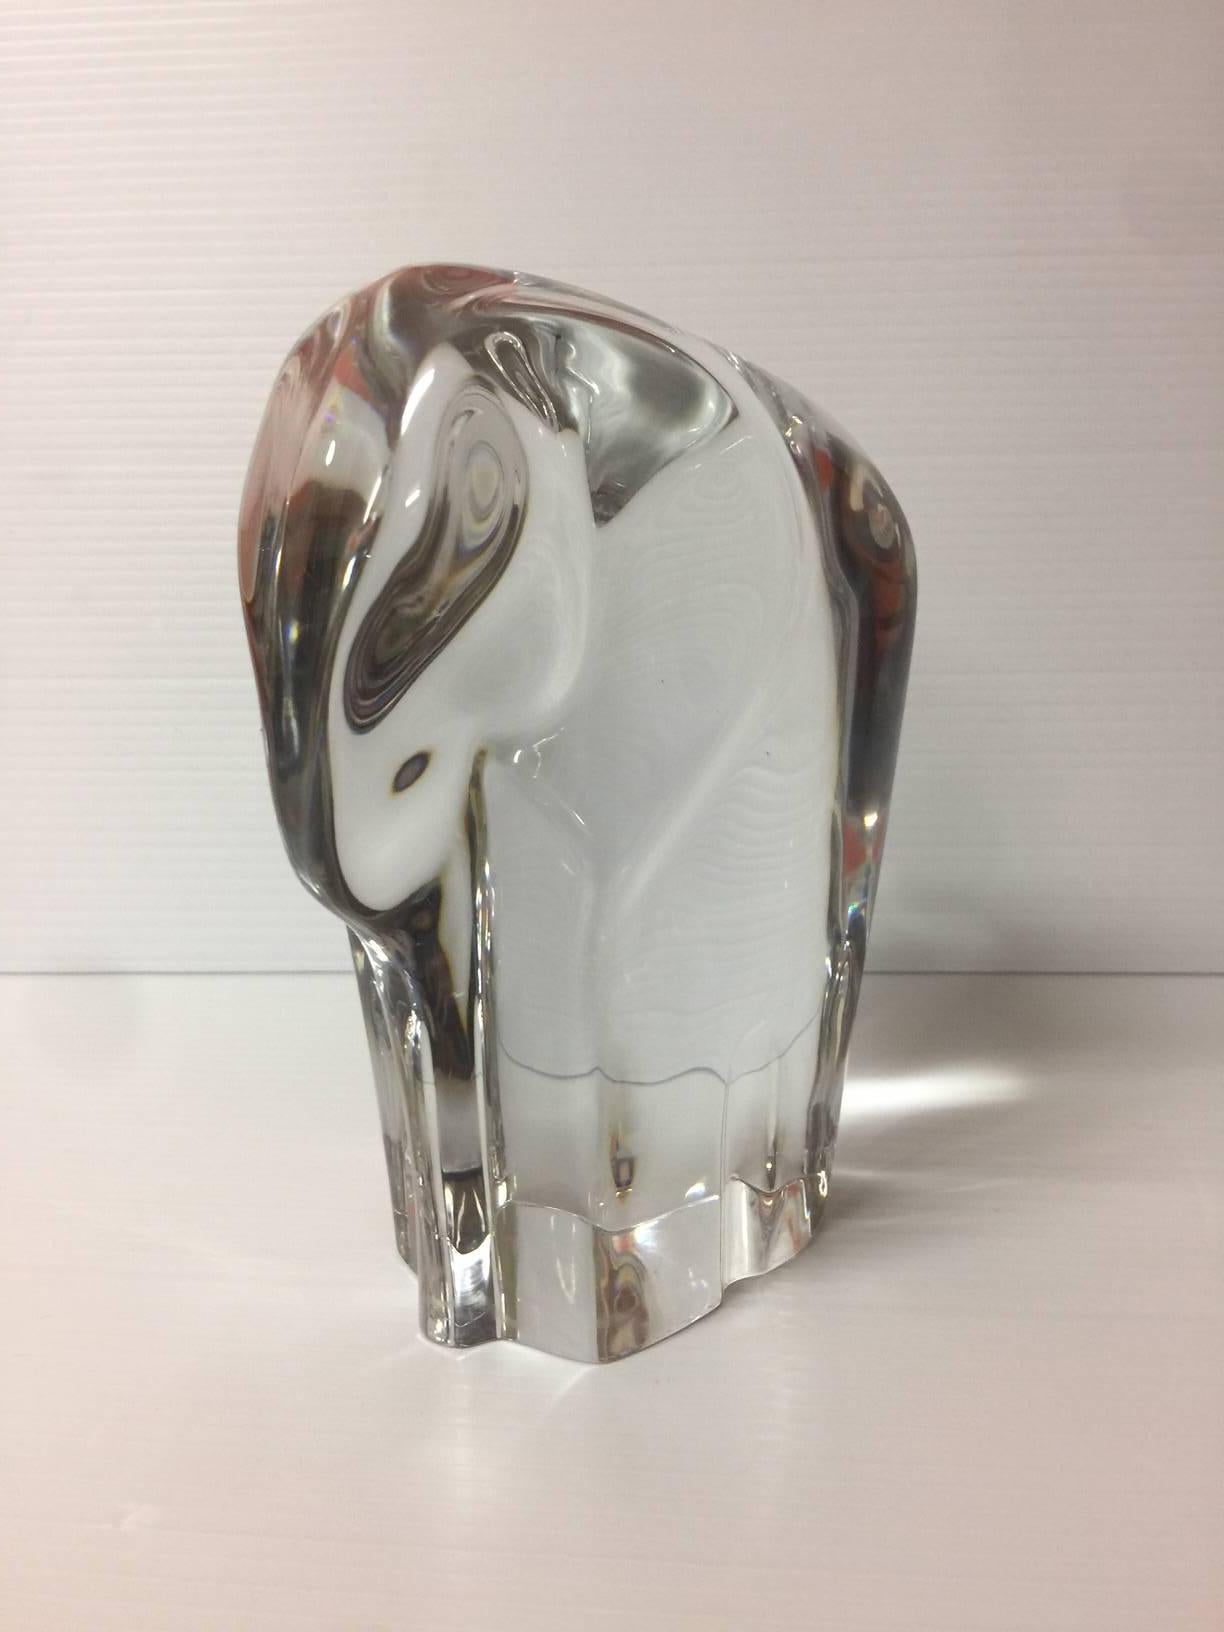 Organic Modern Modernist Crystal Elephant by Olle Alberius for Orrefors